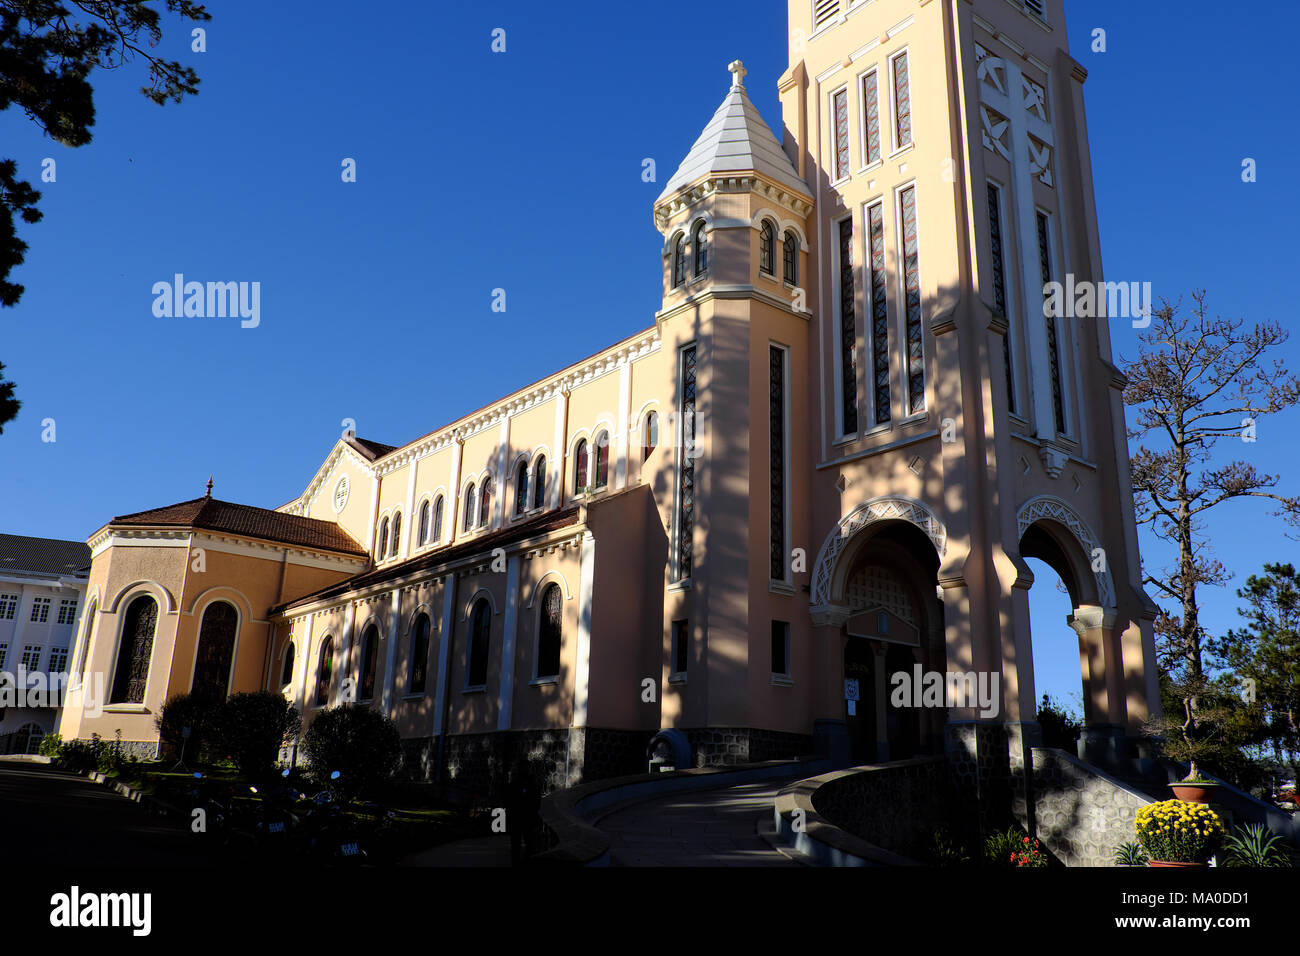 Da Lat Cathedral, an ancient architectural works, French classical architectural style, chicken Church Dalat with statue of rooster on top bell tower Stock Photo